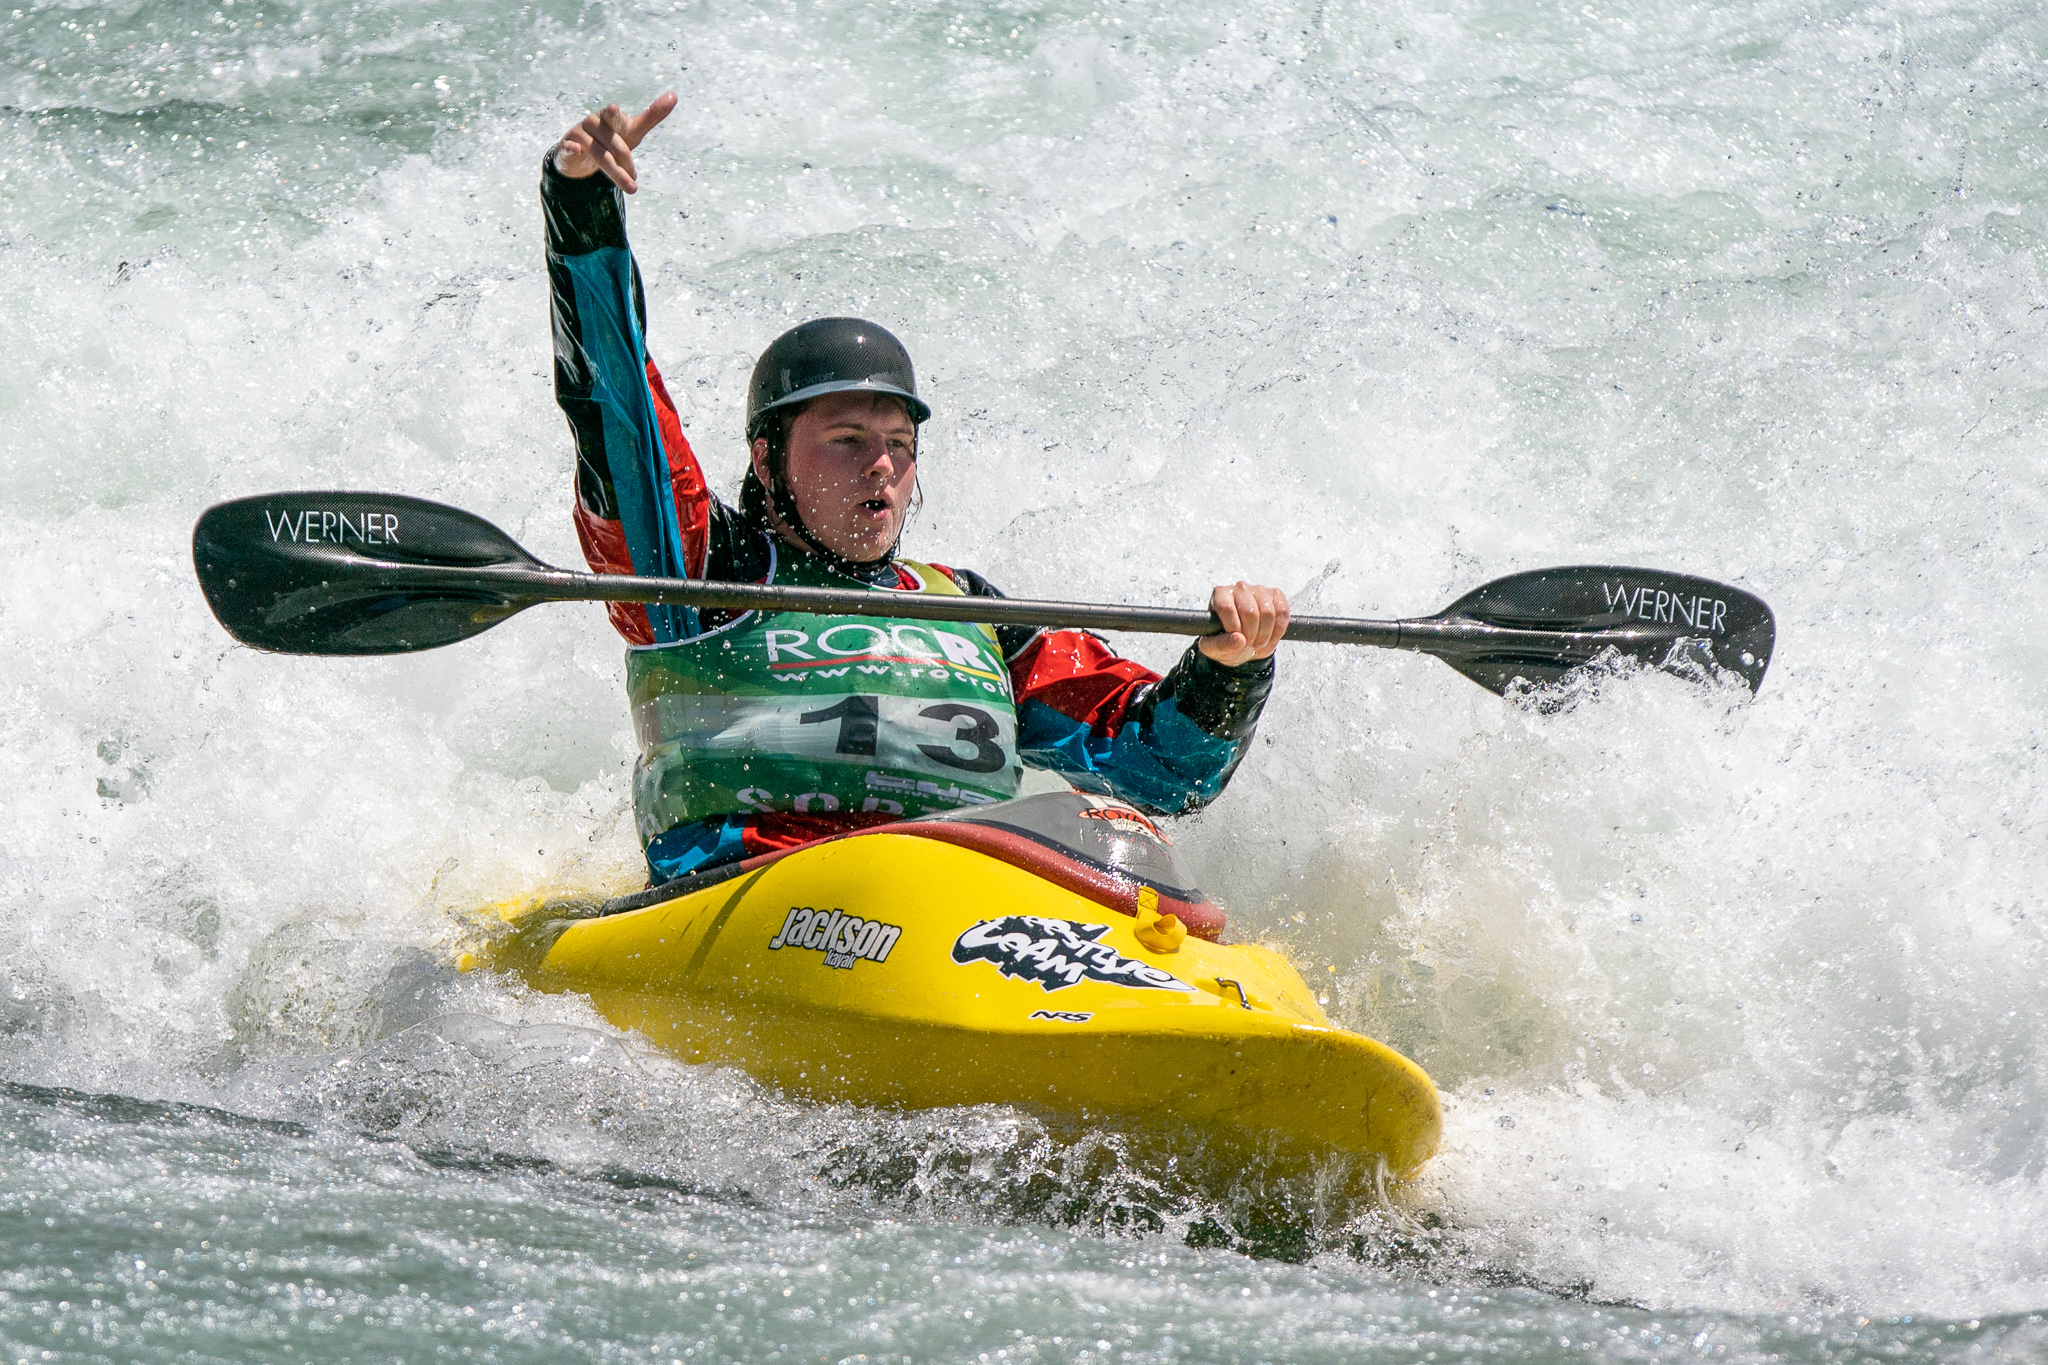 ICF Freestyle Worlds 2019 ©Peter Holcombe/kayaksession.com